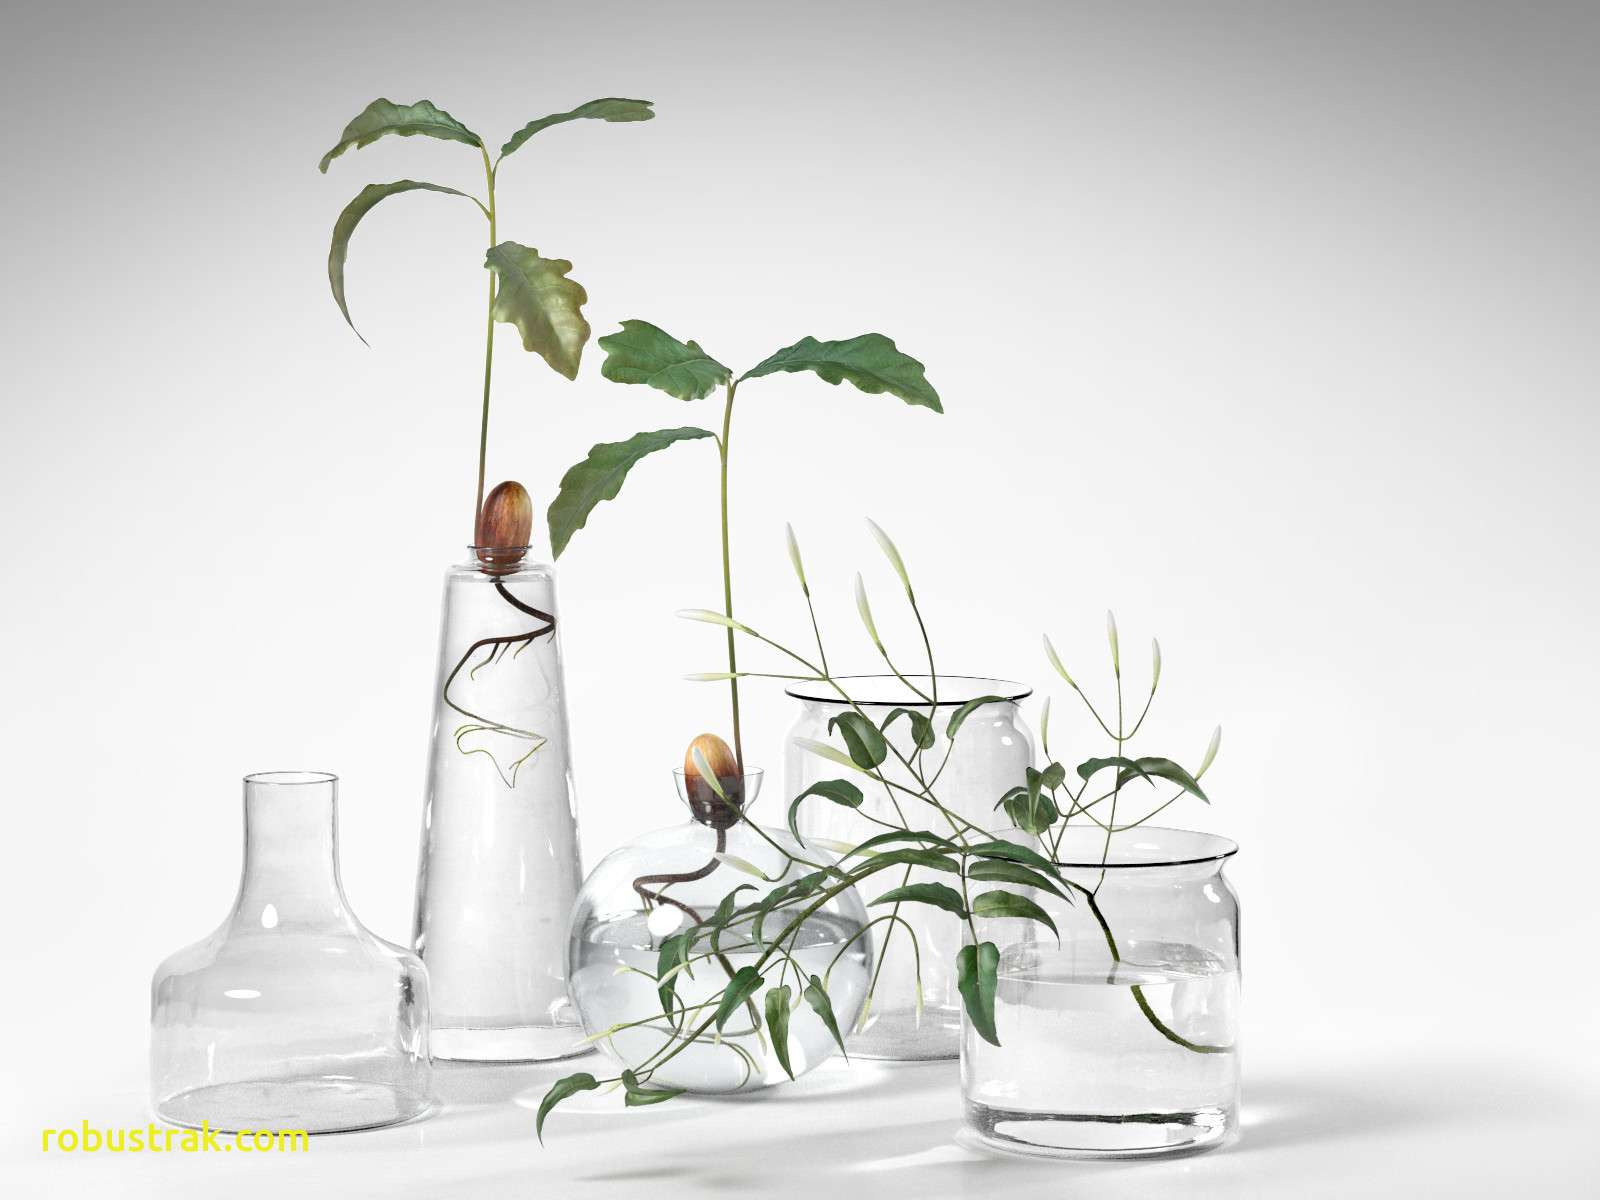 22 Recommended Glass Bottle Vase 2024 free download glass bottle vase of elegant decorating with vases home design ideas in 707h vases plants in unique design perfect for decorating your desk realistic appearancei 16d